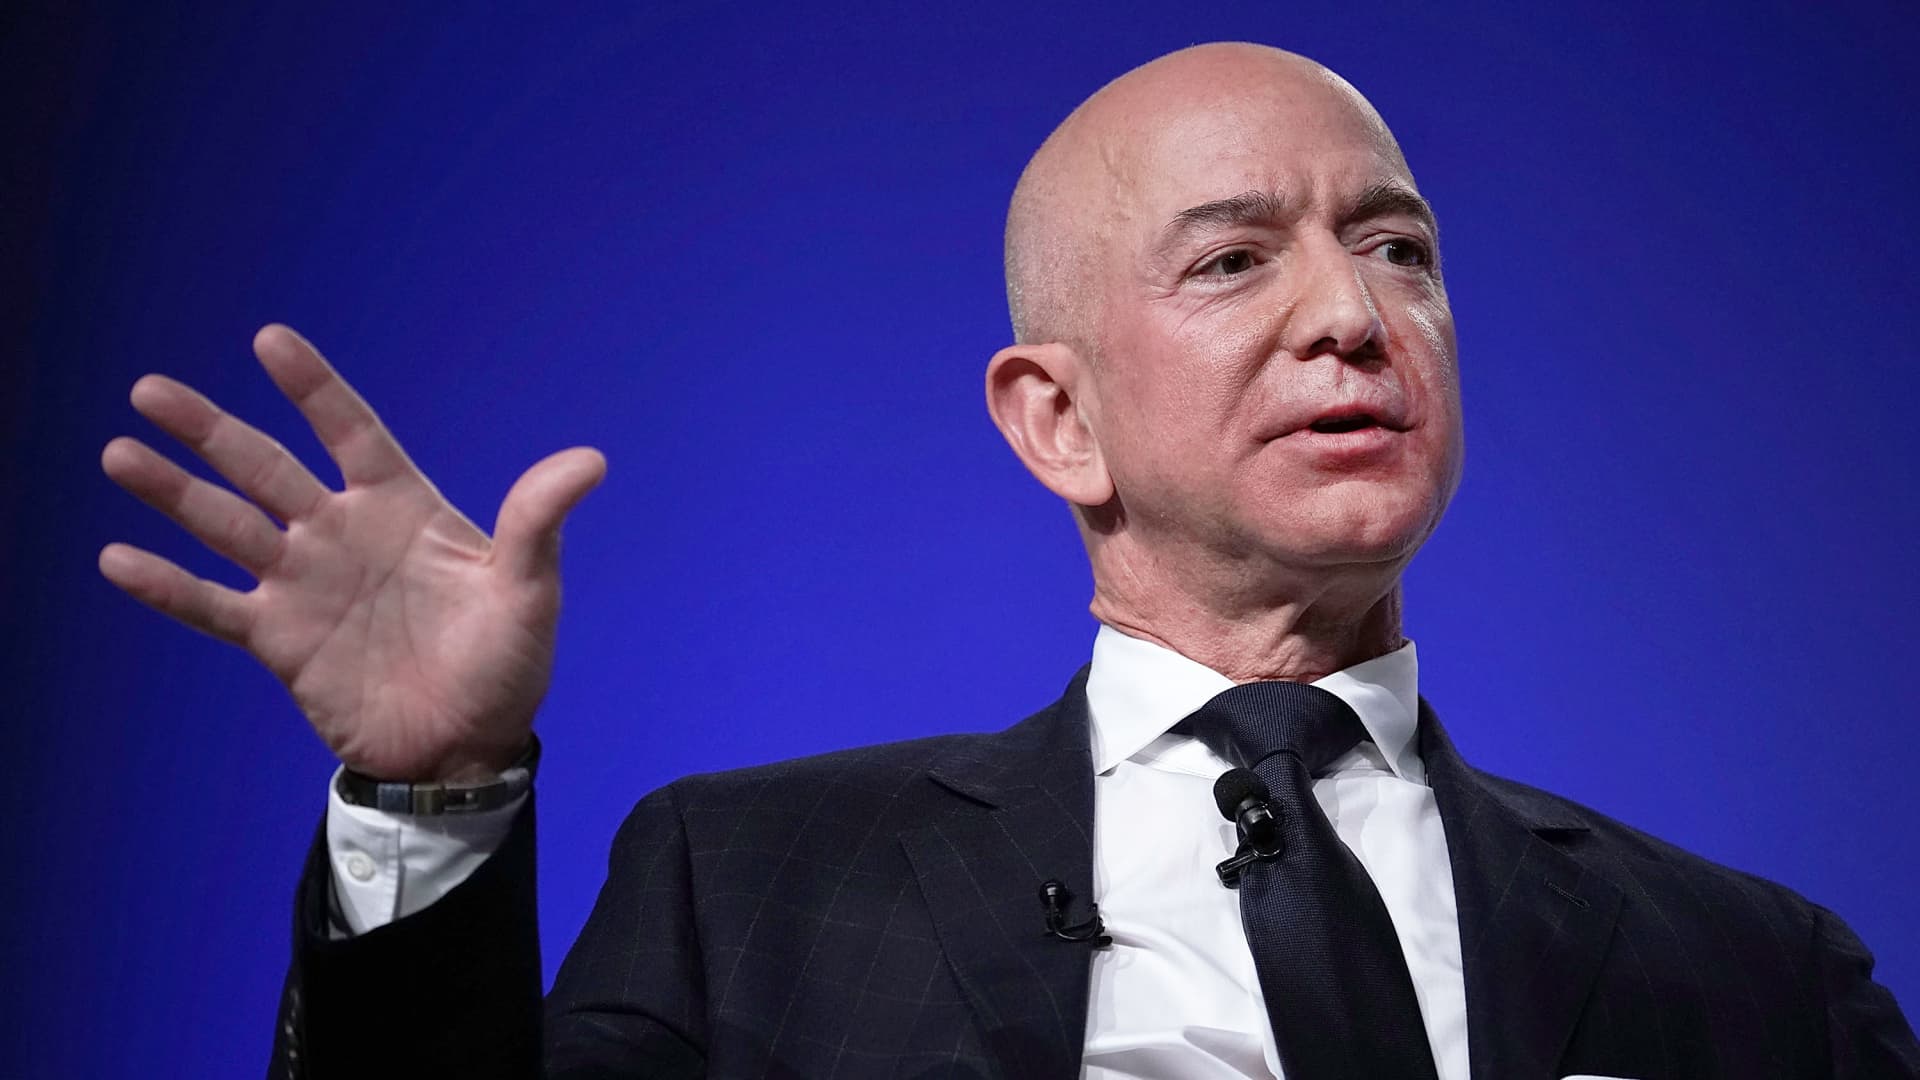 Jeff Bezos to step down as Amazon CEO, Andy Jassy to take over in Q3